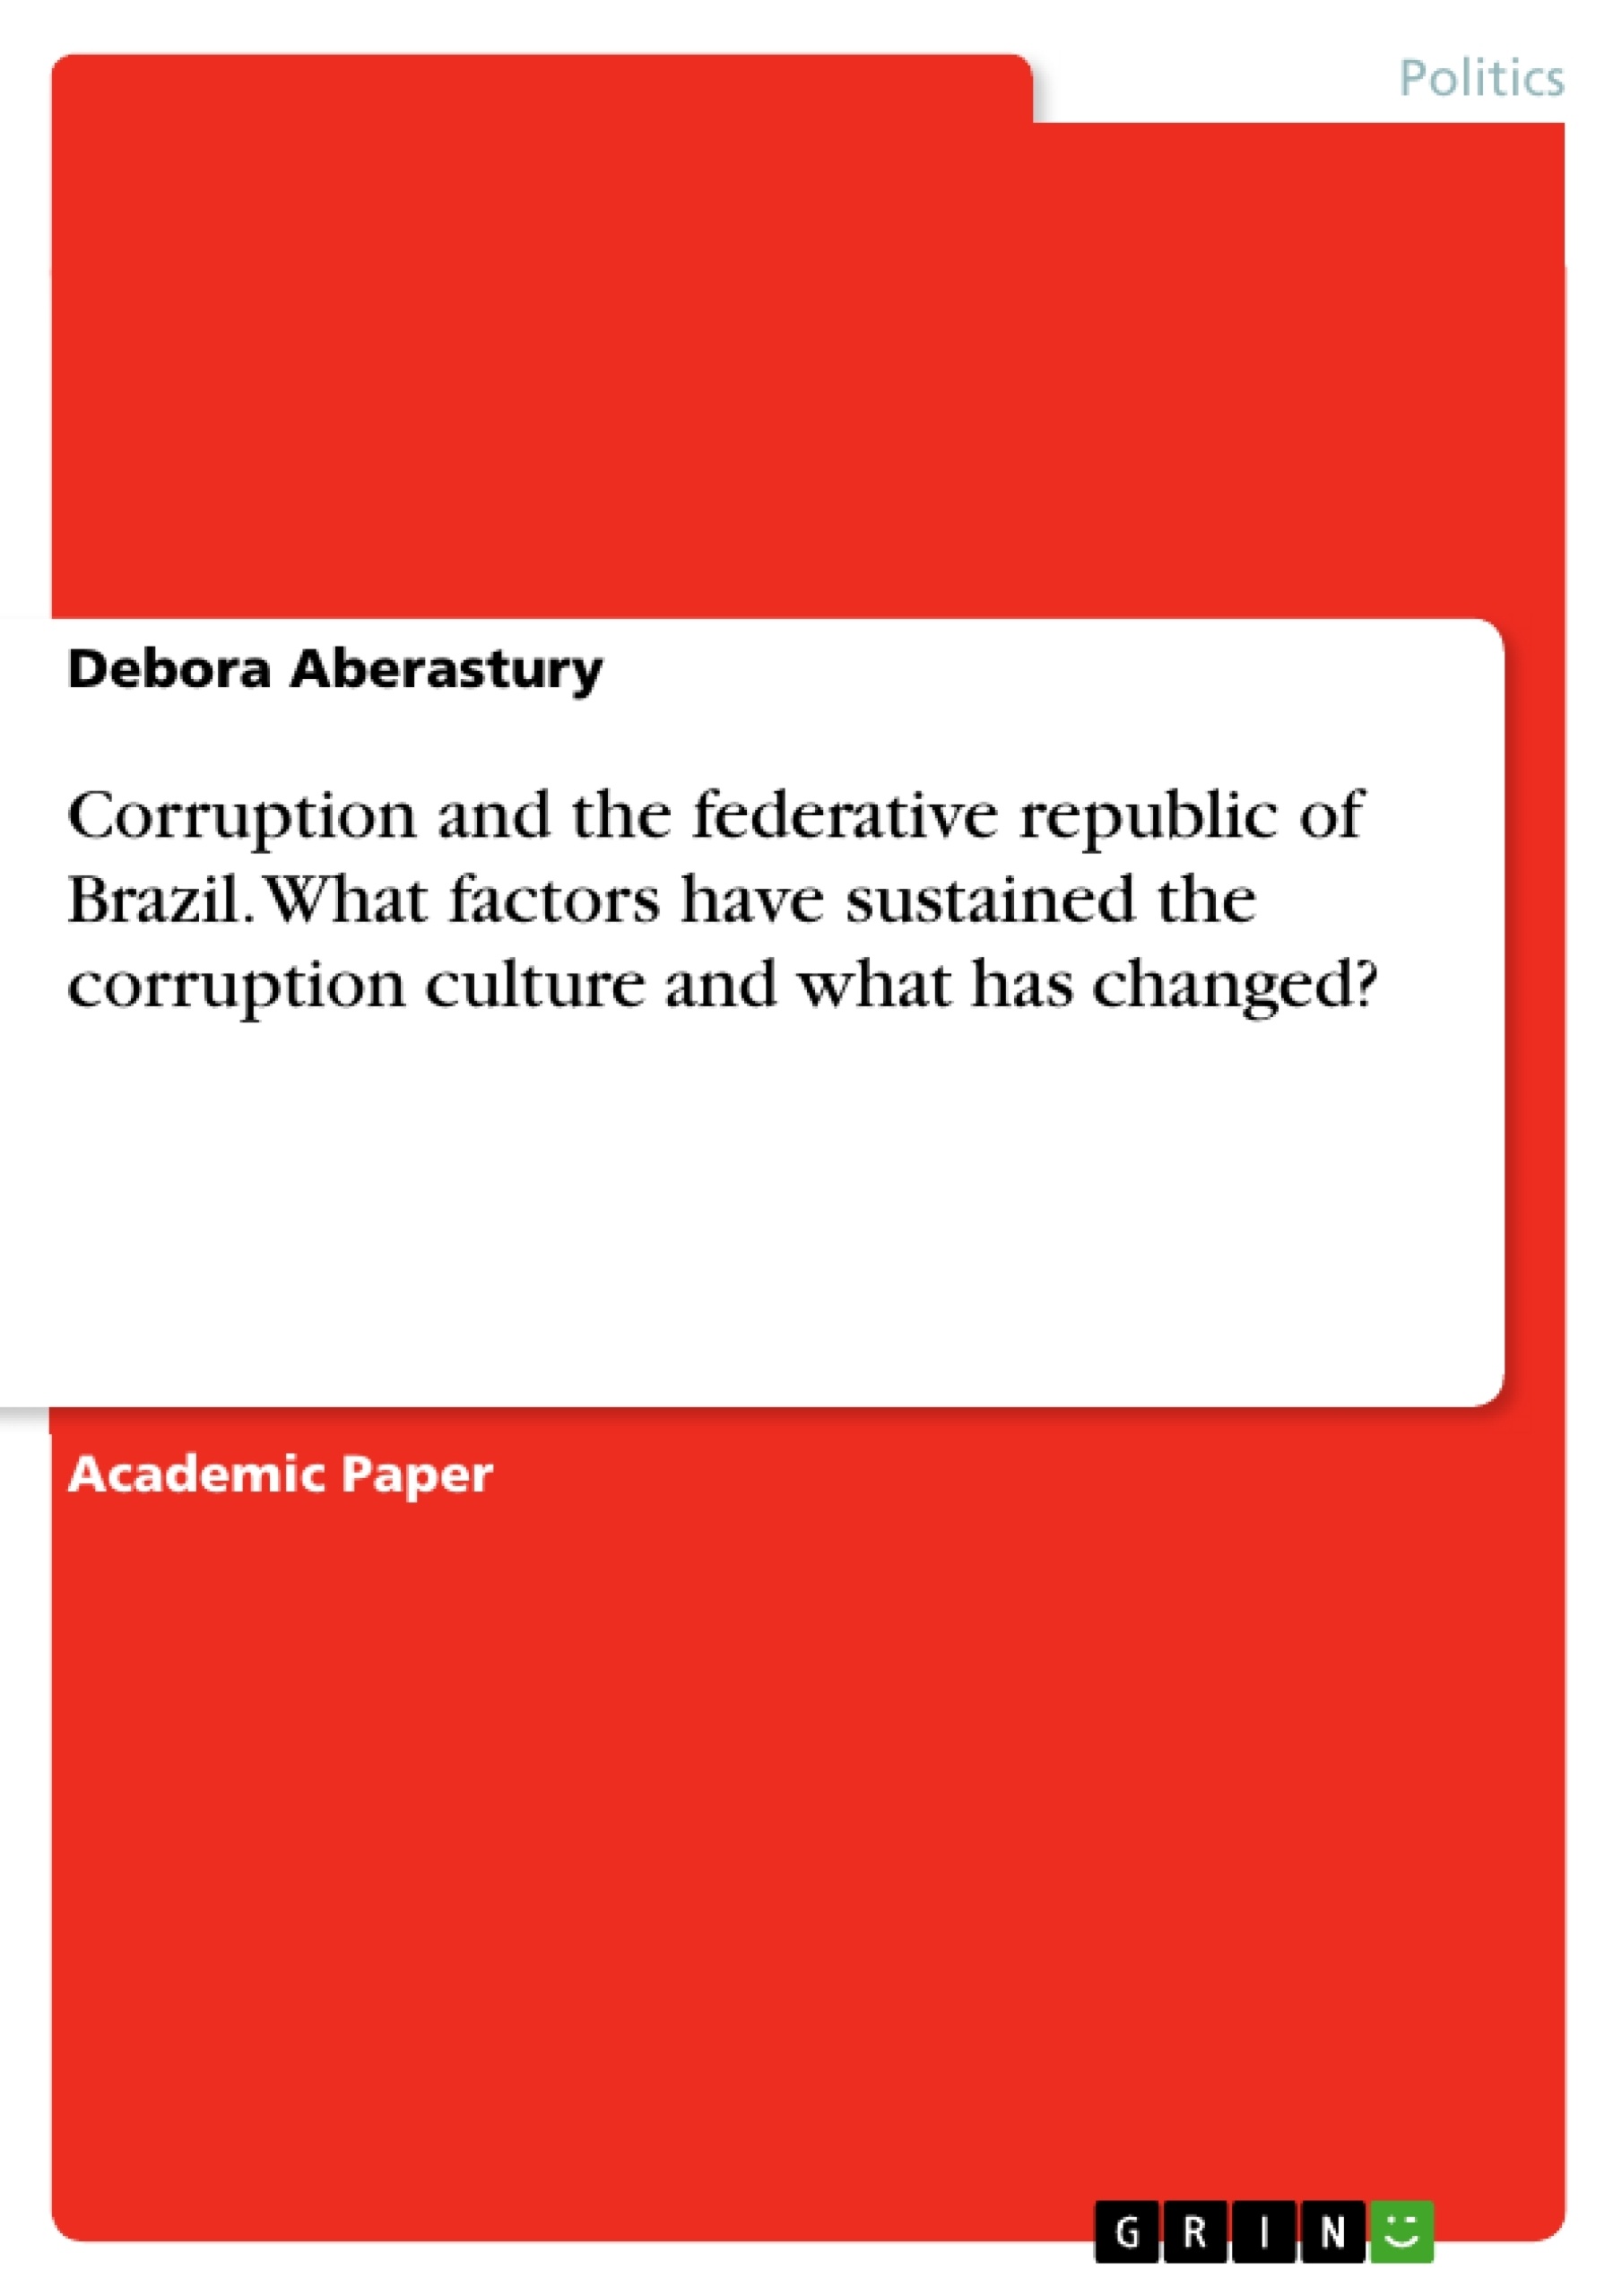 Title: Corruption and the federative republic of Brazil. What factors have sustained the corruption culture and what has changed?